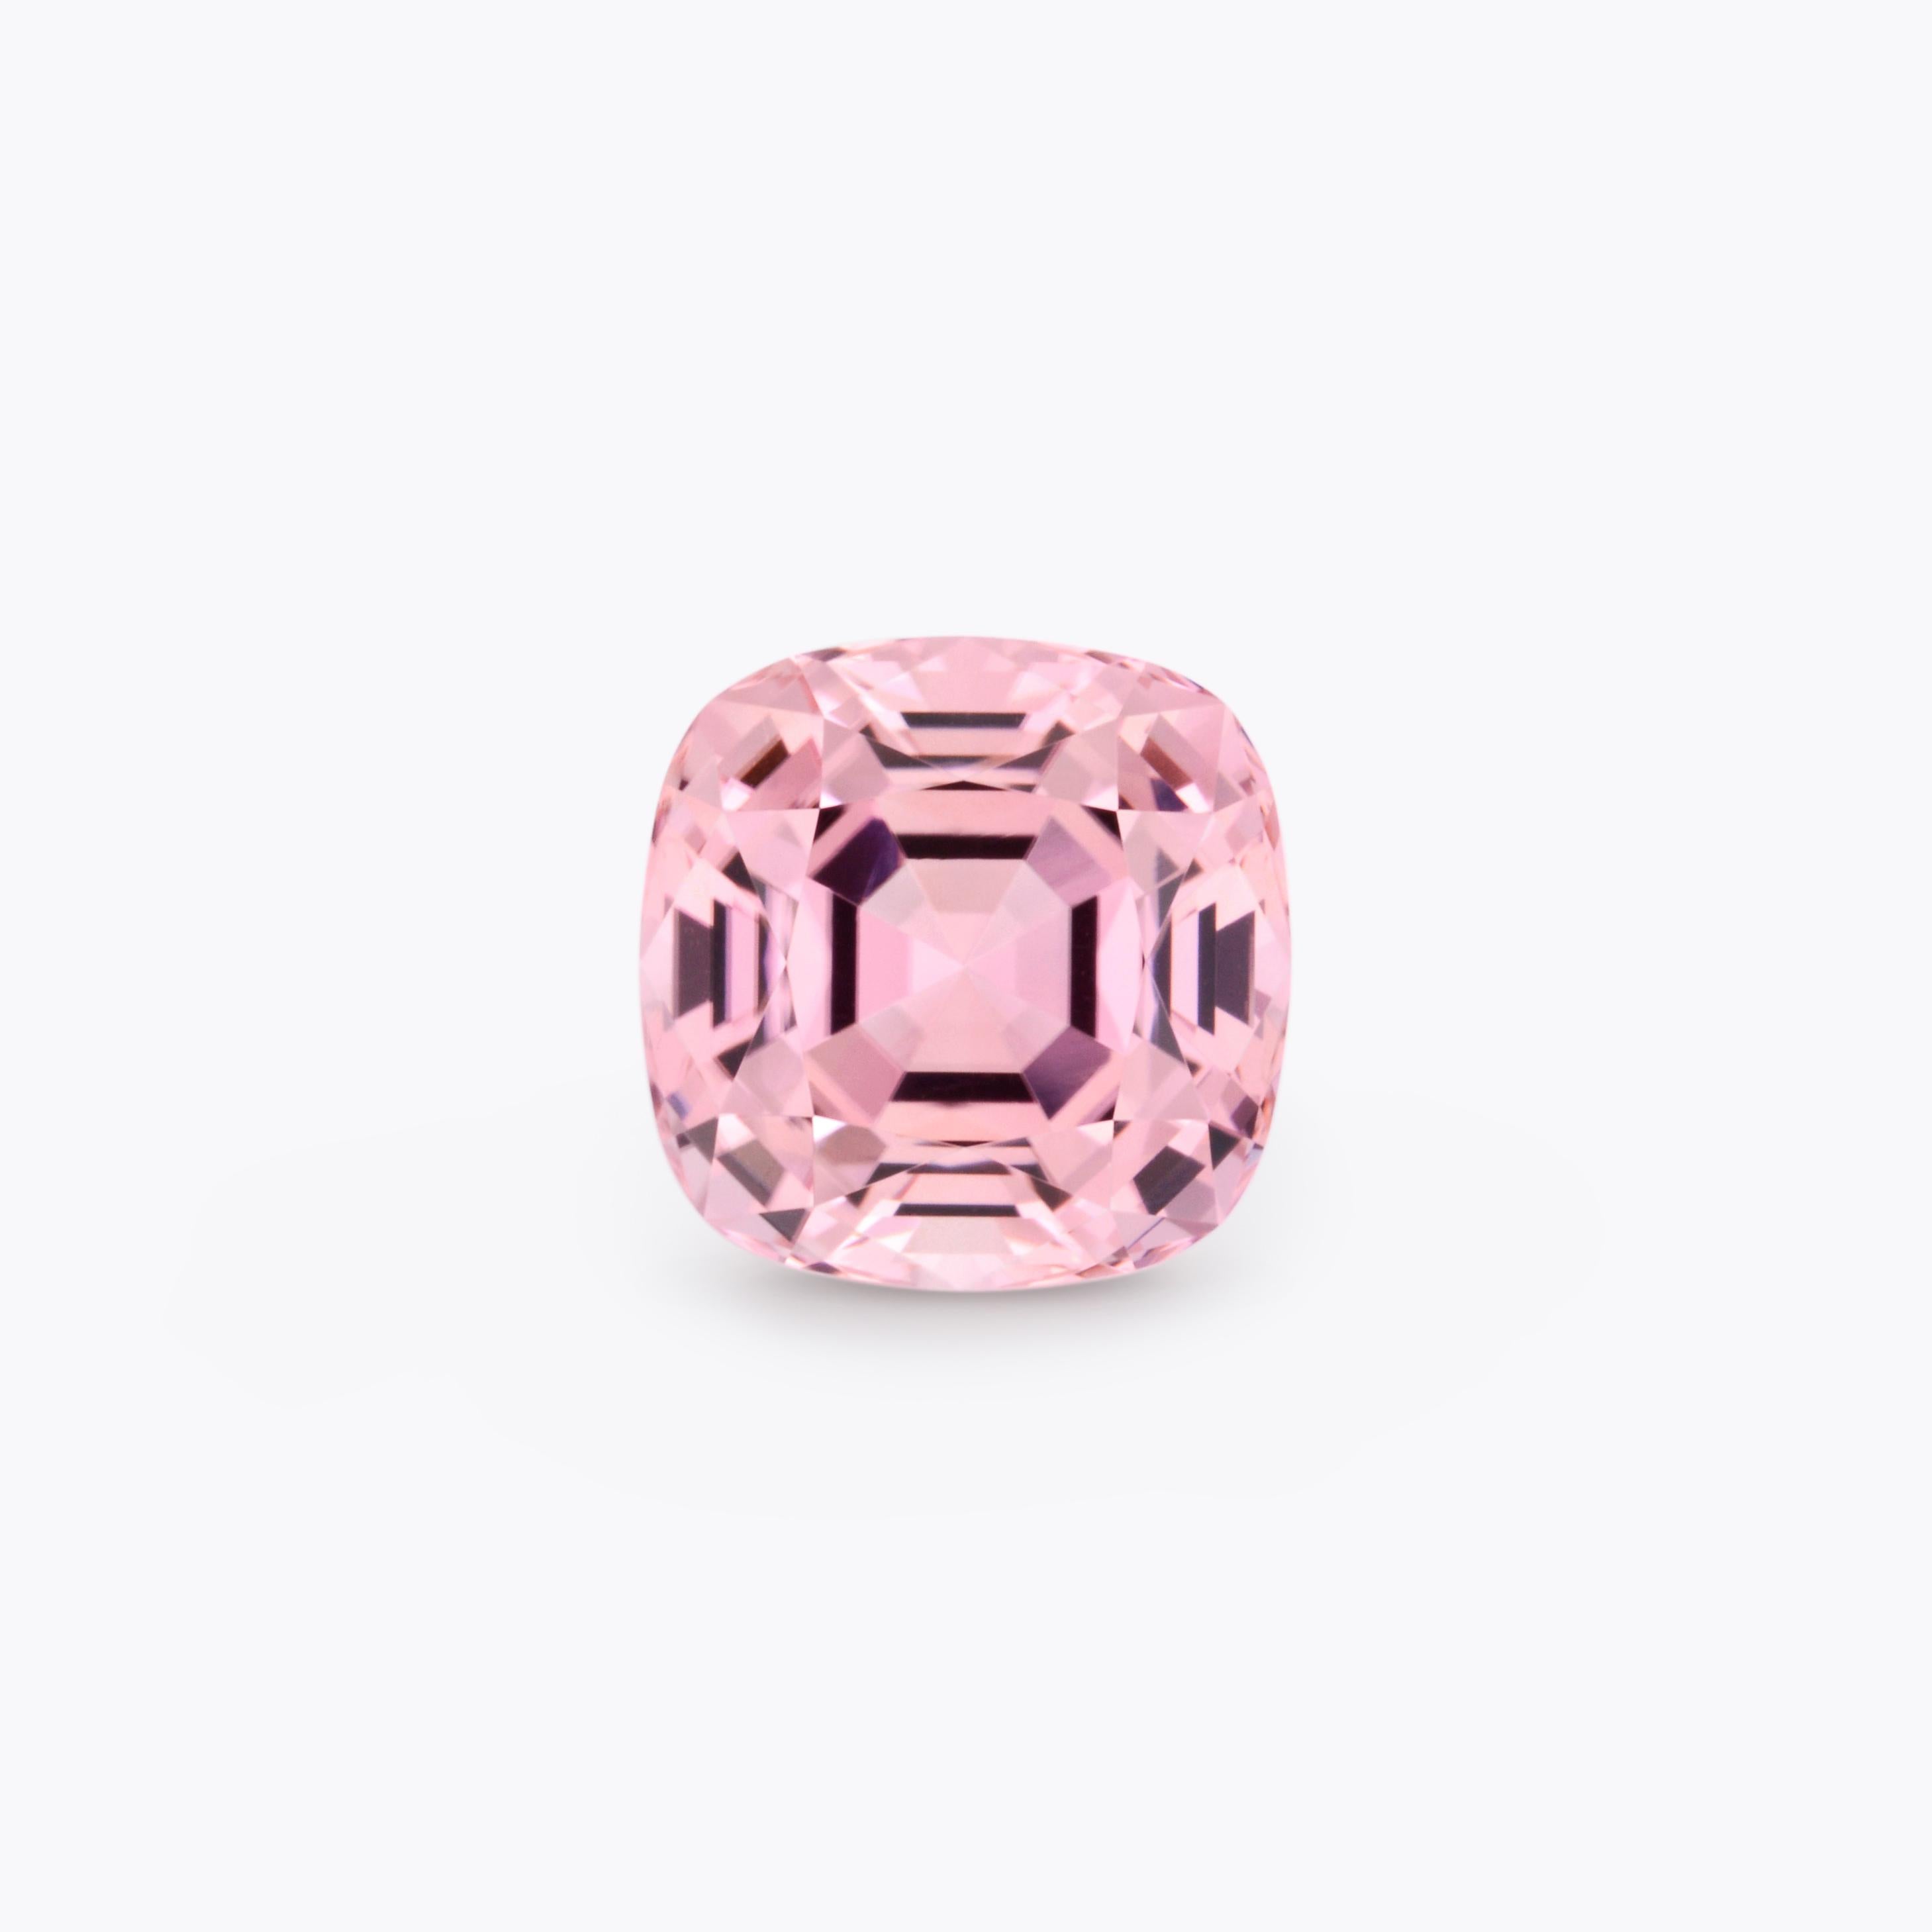 Pristine 7.46 carat Pink Tourmaline cushion loose gemstone, offered unmounted to a special lady.
Returns are accepted and paid by us within 7 days of delivery.
We offer supreme custom jewelry work upon request. Please contact us for more